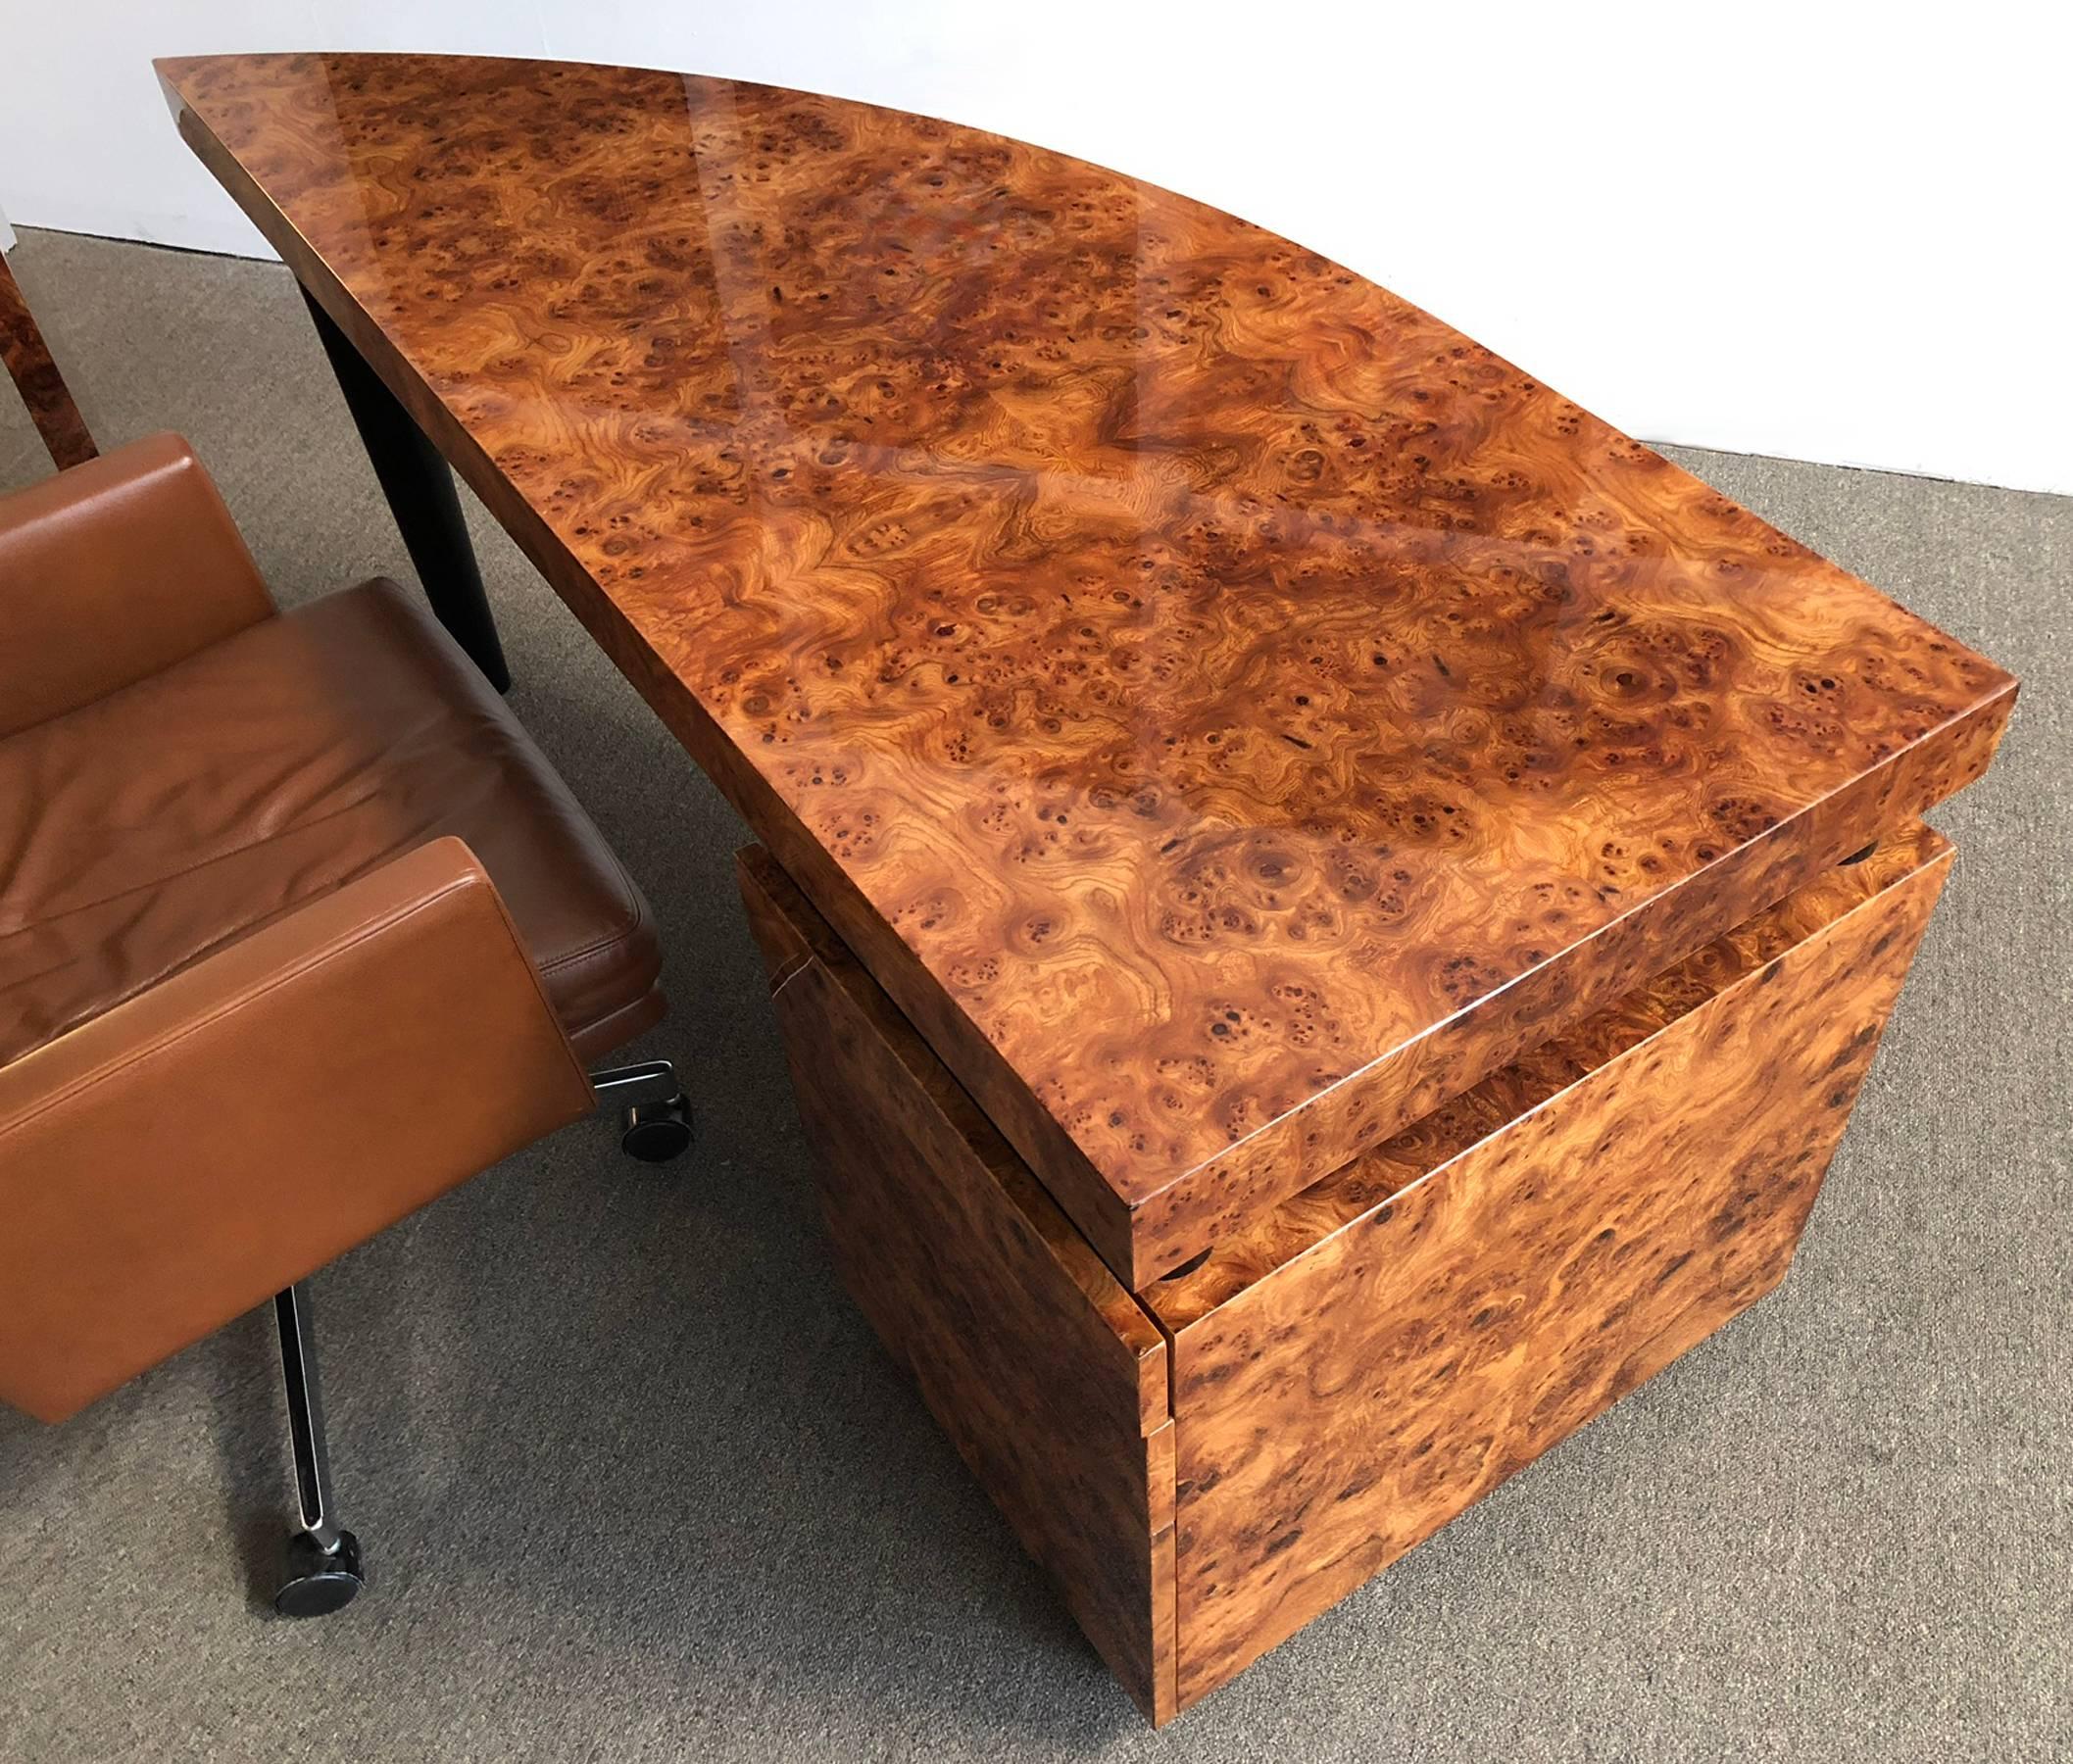 Walnut burl desk with black lacquered leg and details. Designed by Leon Rosen for the Pace Collection. Three drawers.